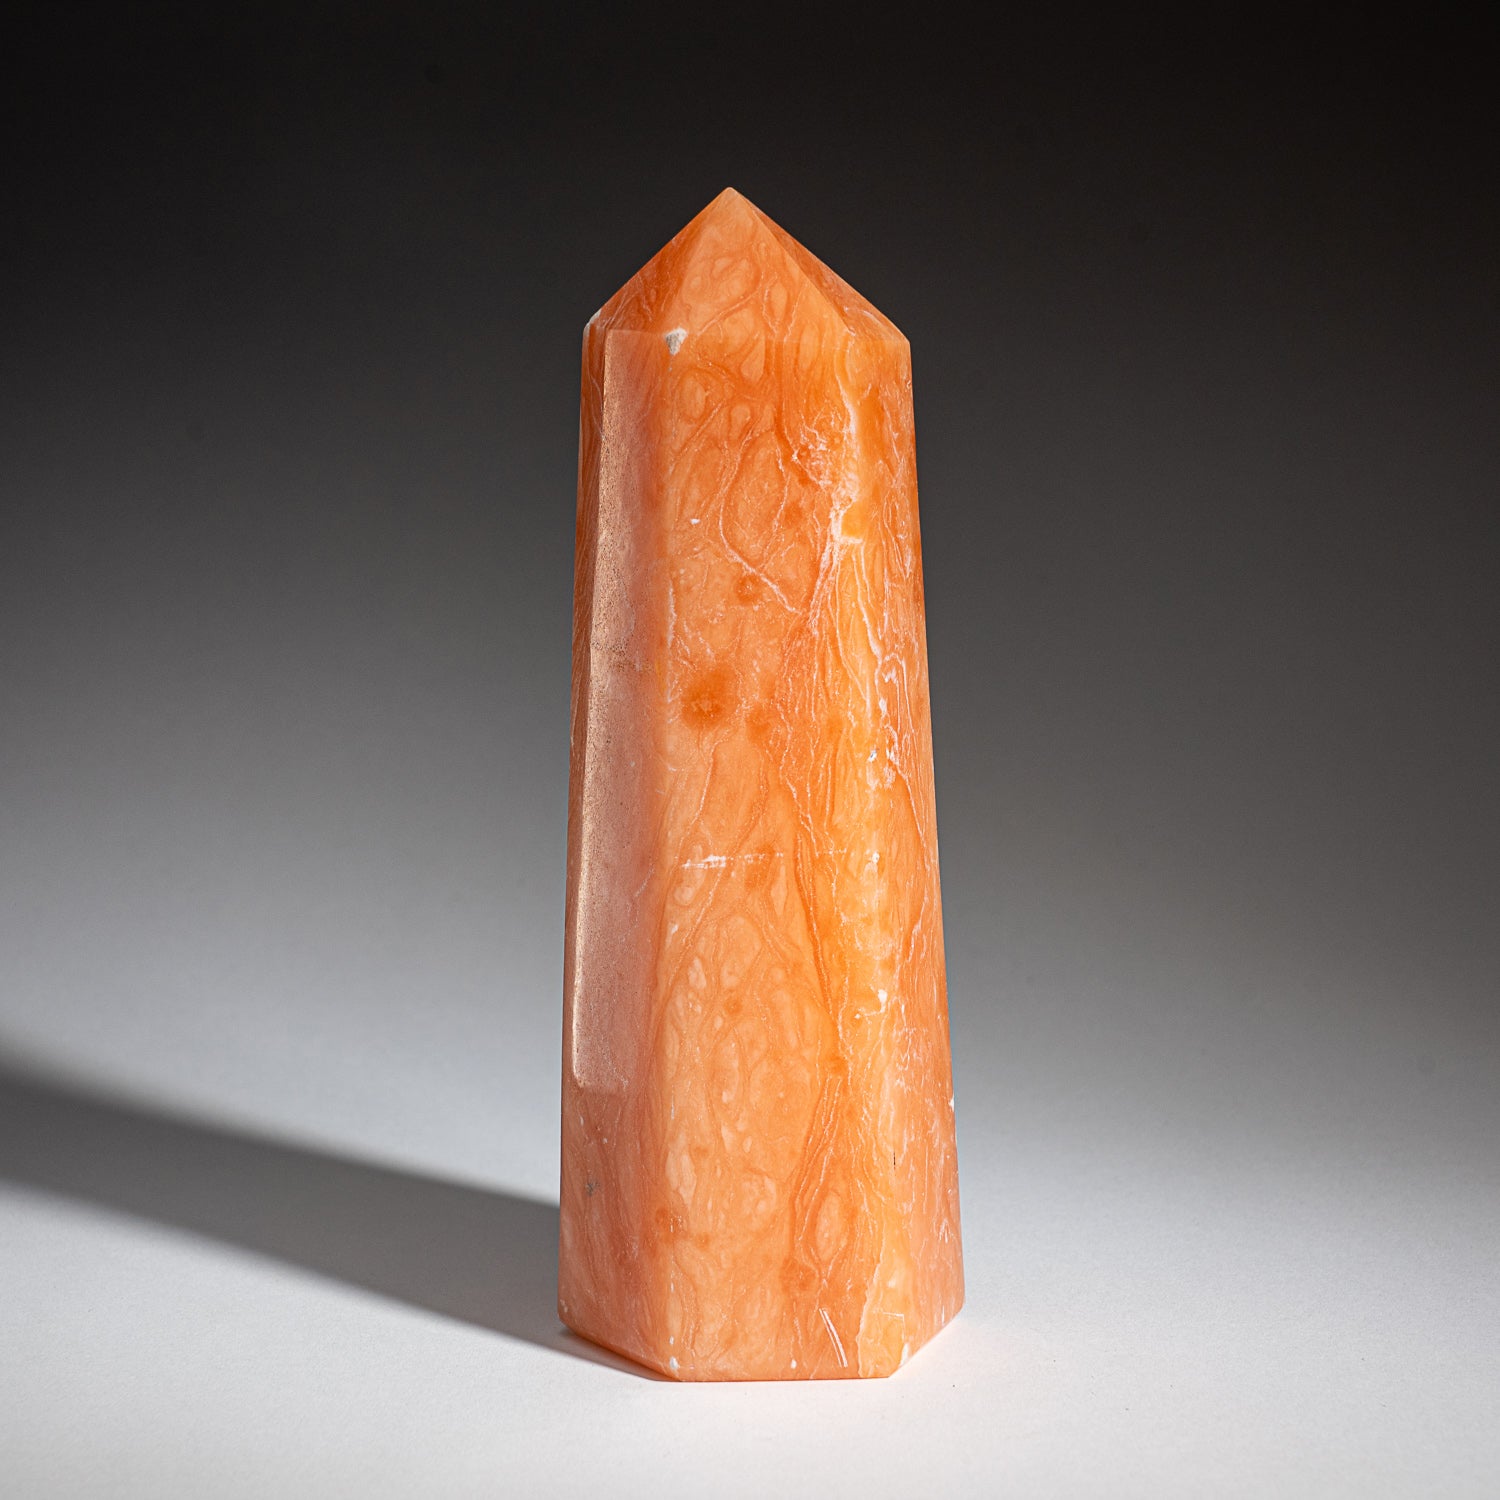 Genuine Polished Orange Selenite Point from Morocco (2 lbs)